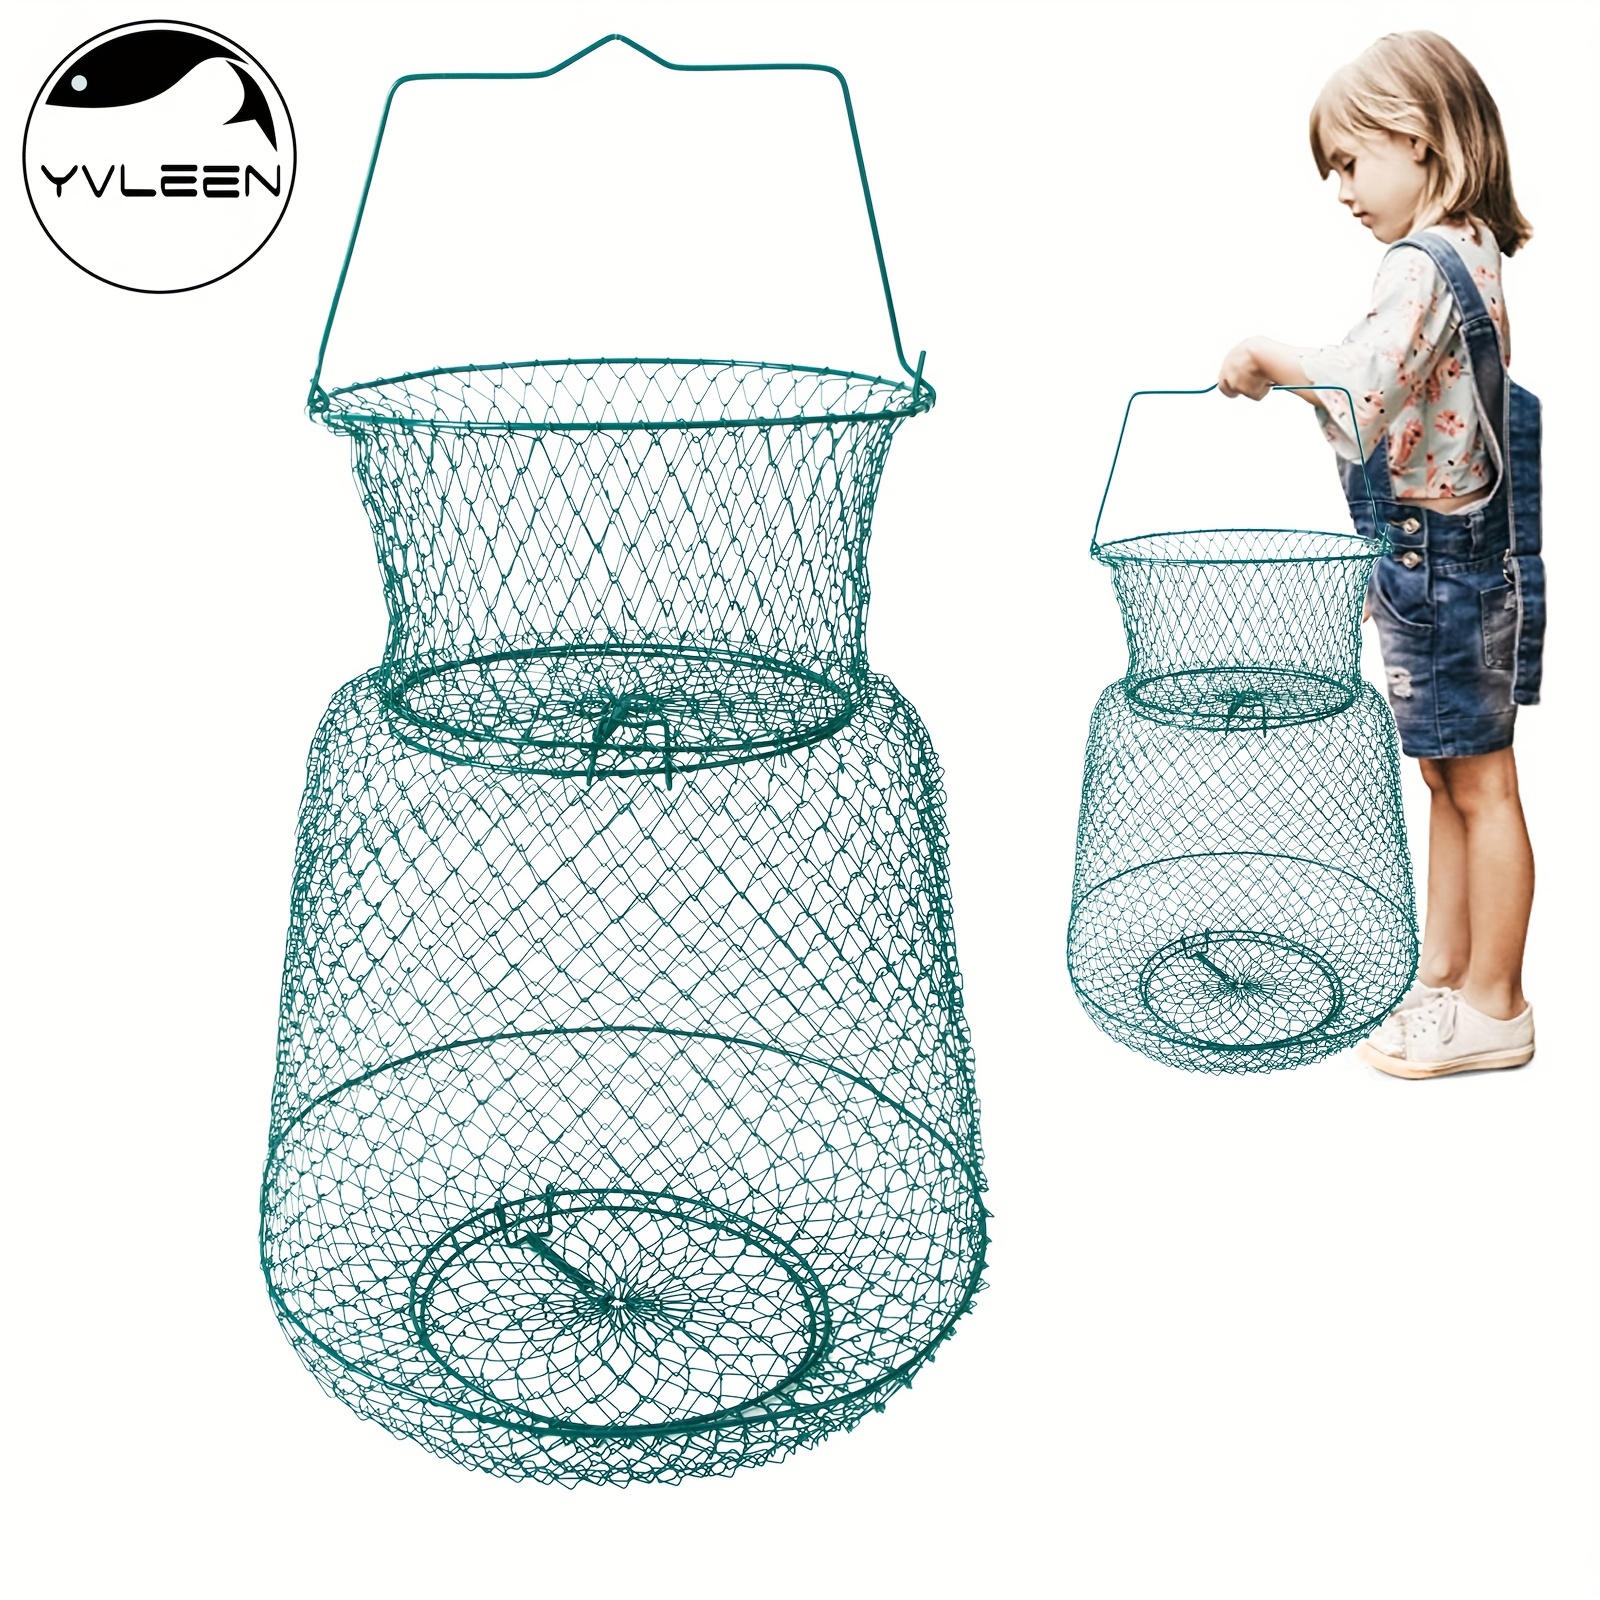 * Coating Rustproof Fish Basket: Collapsible, Robust, and Easy to Use!